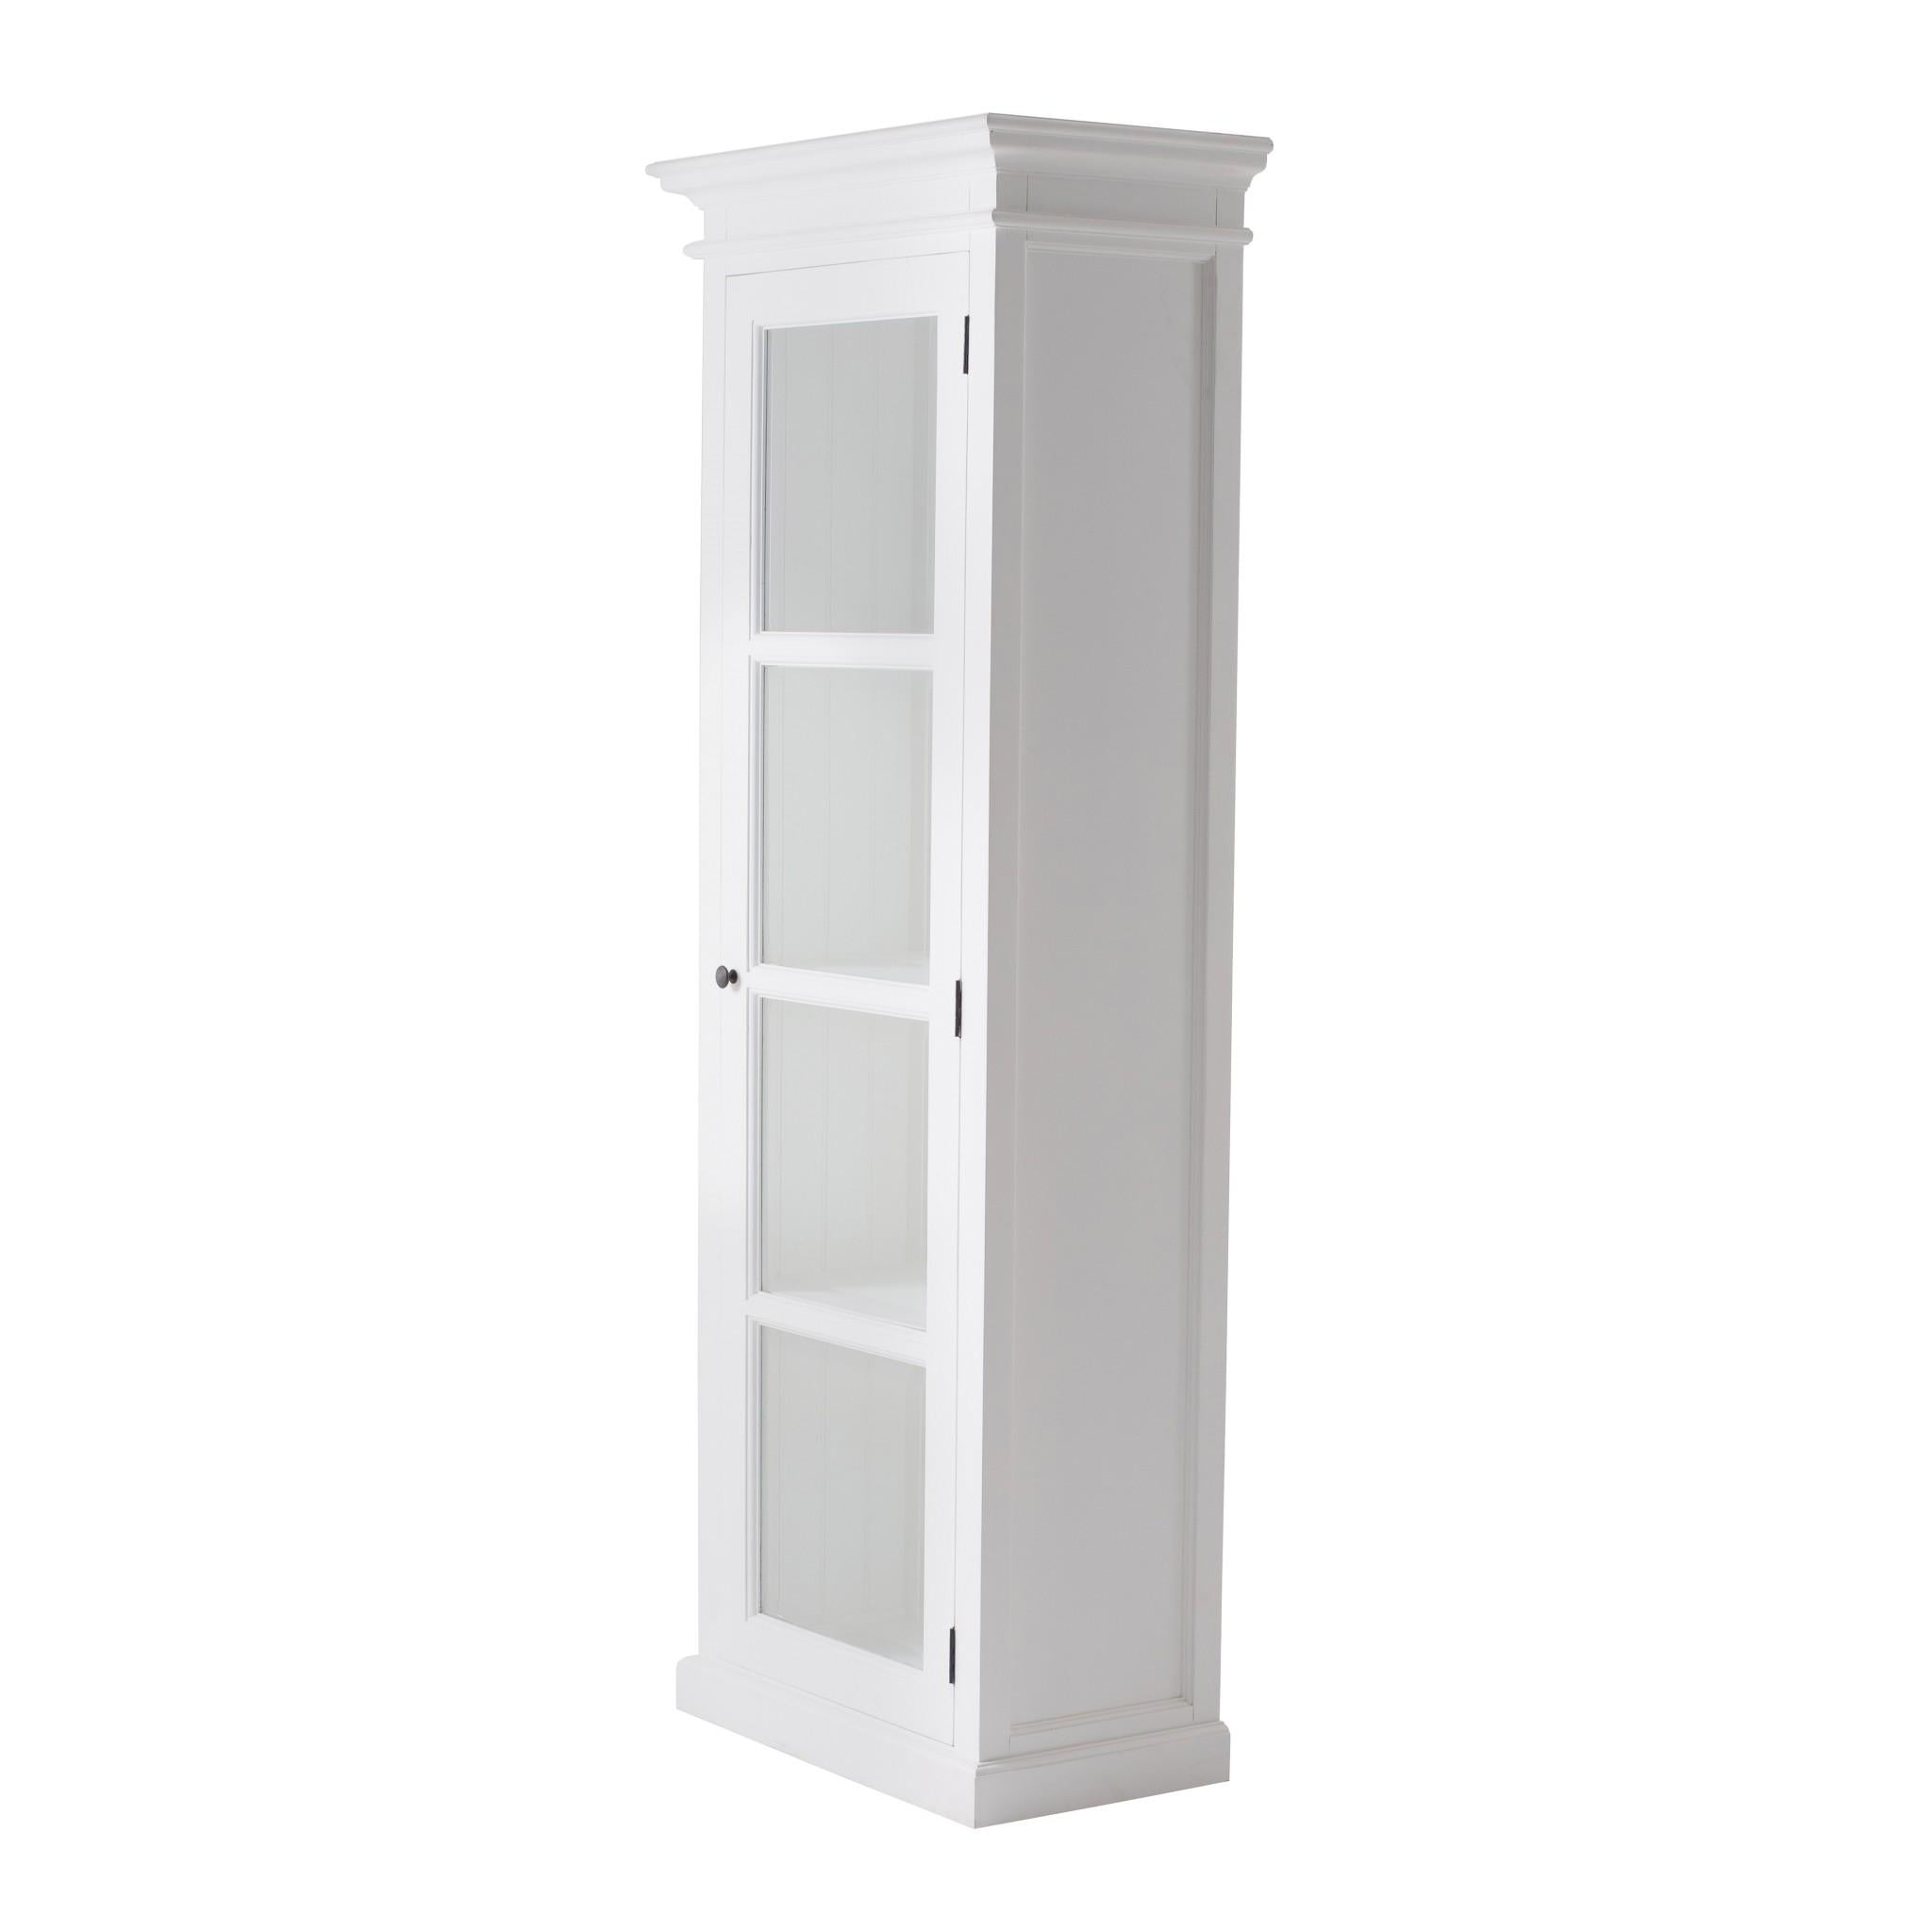 Classic White and Glass Door Storage Cabinet